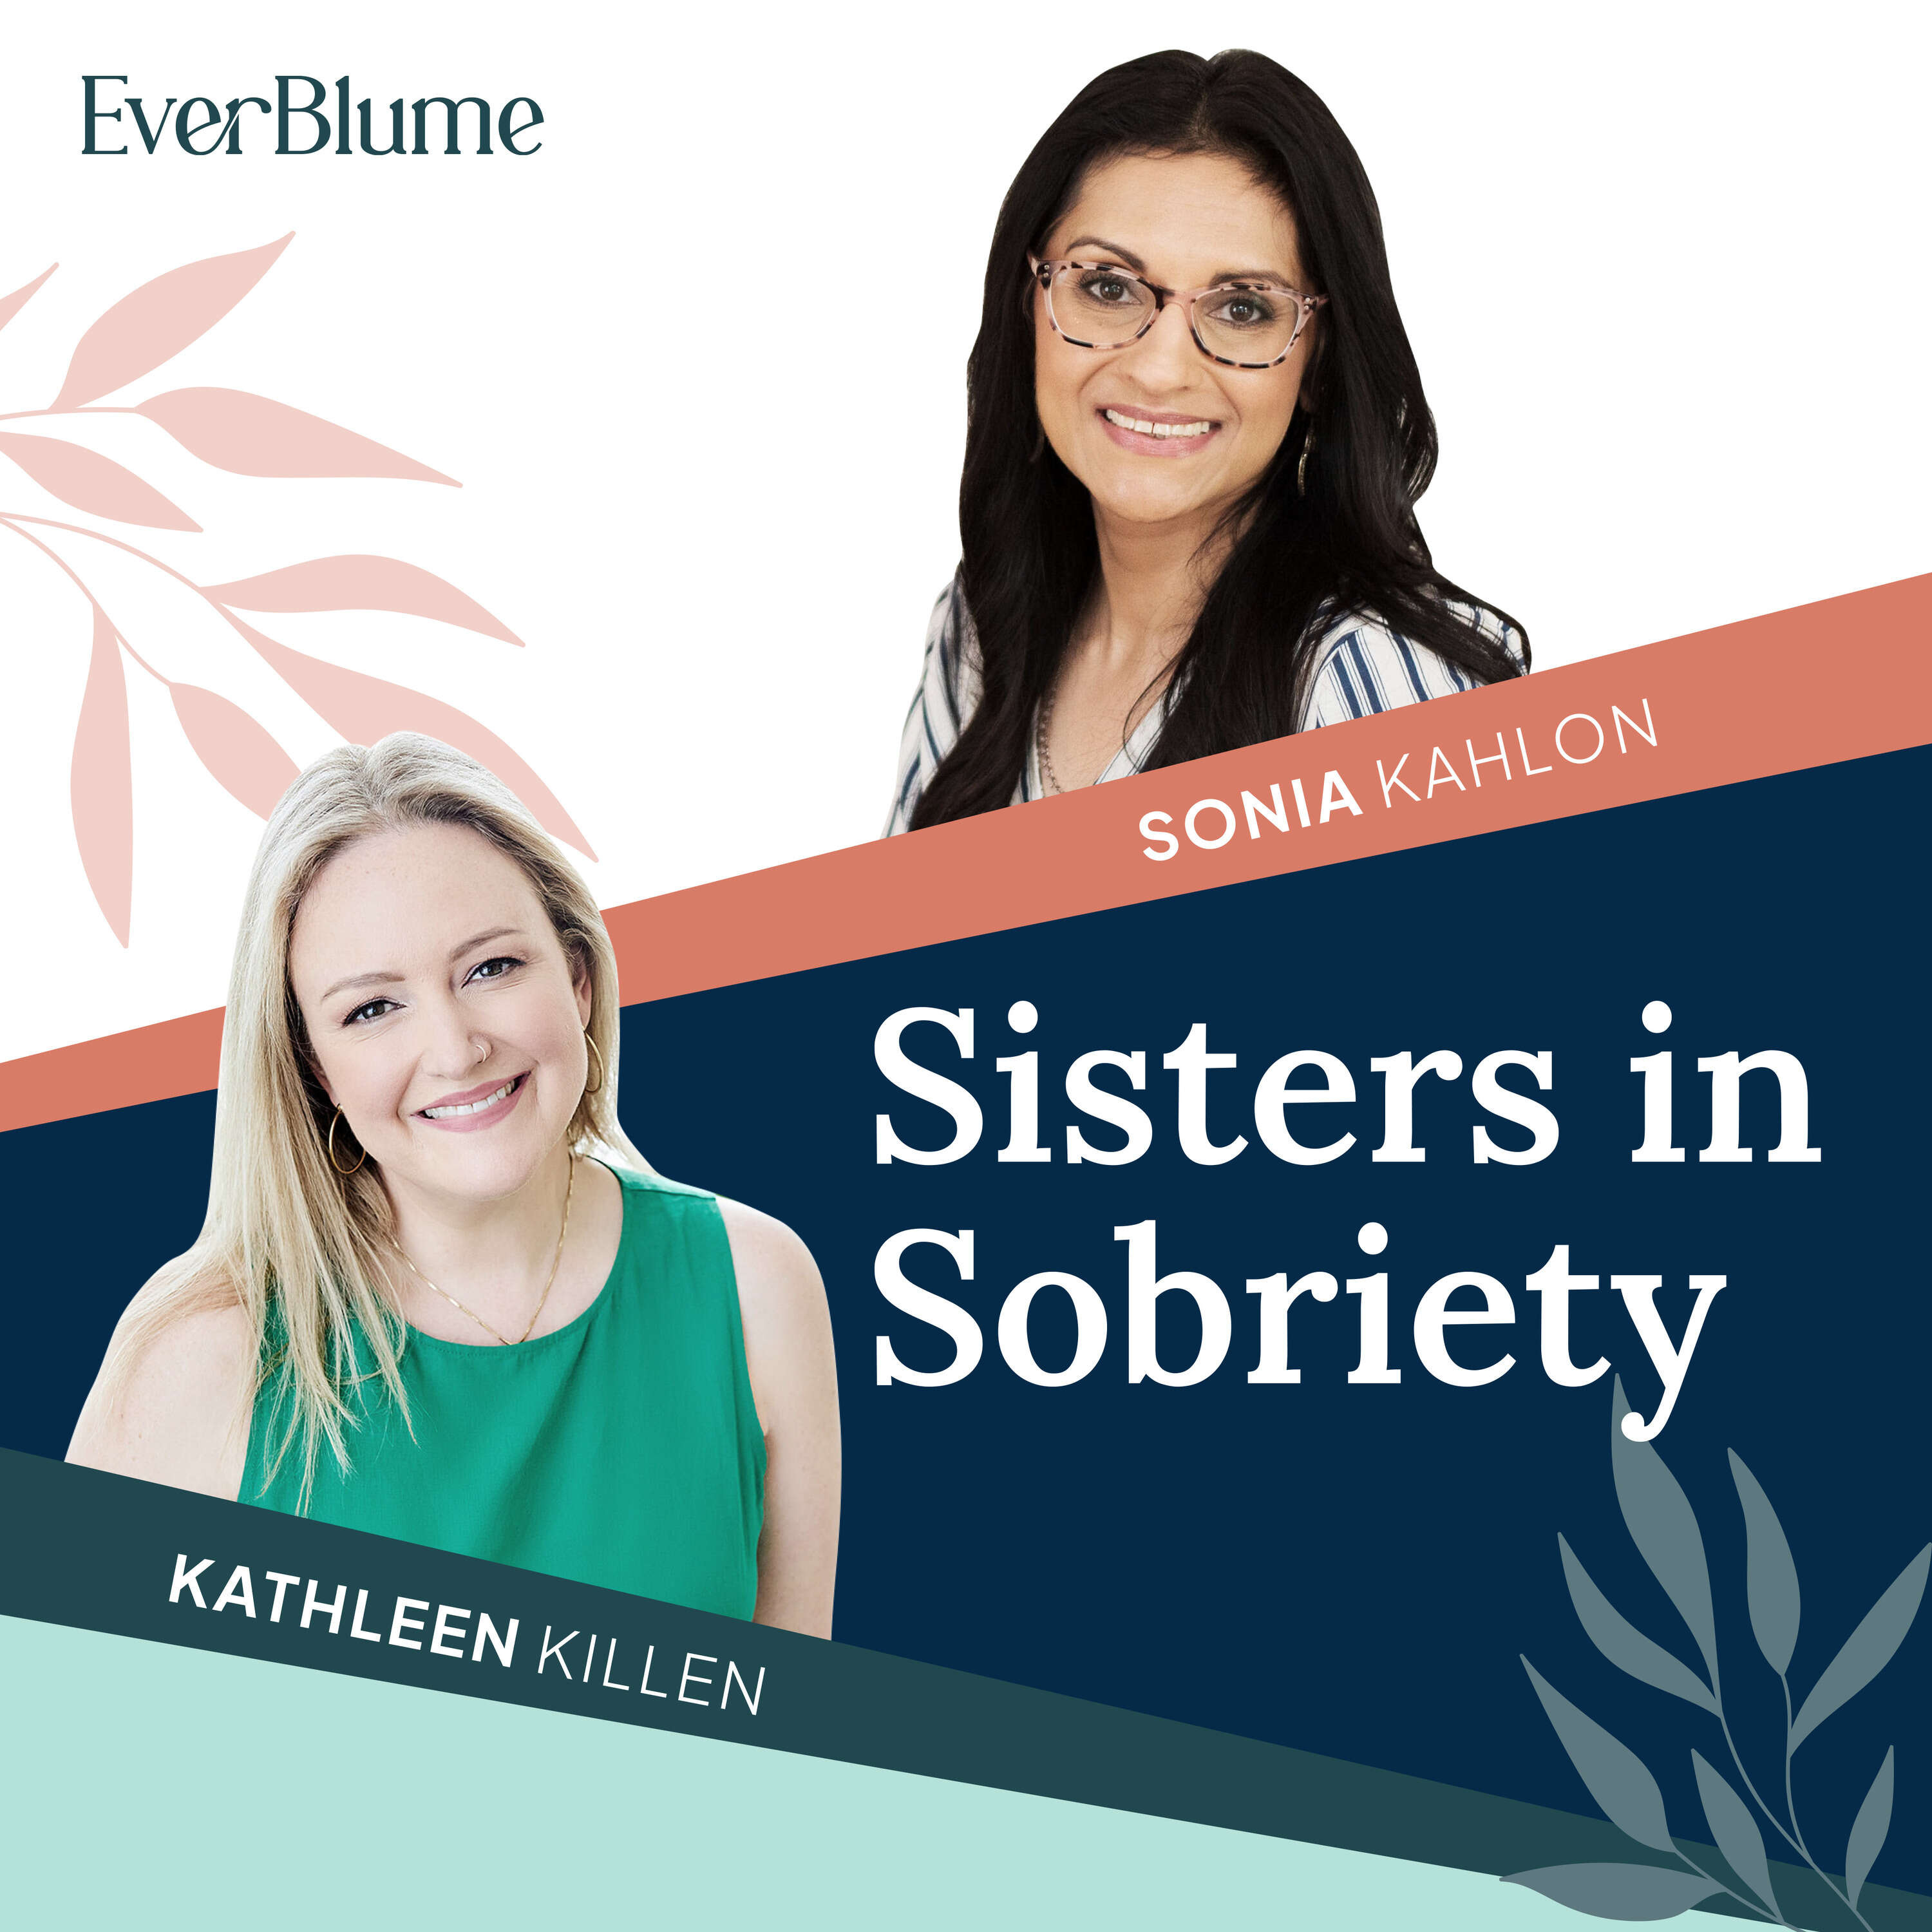 True Connections: The Impact of Sobriety on Friendships